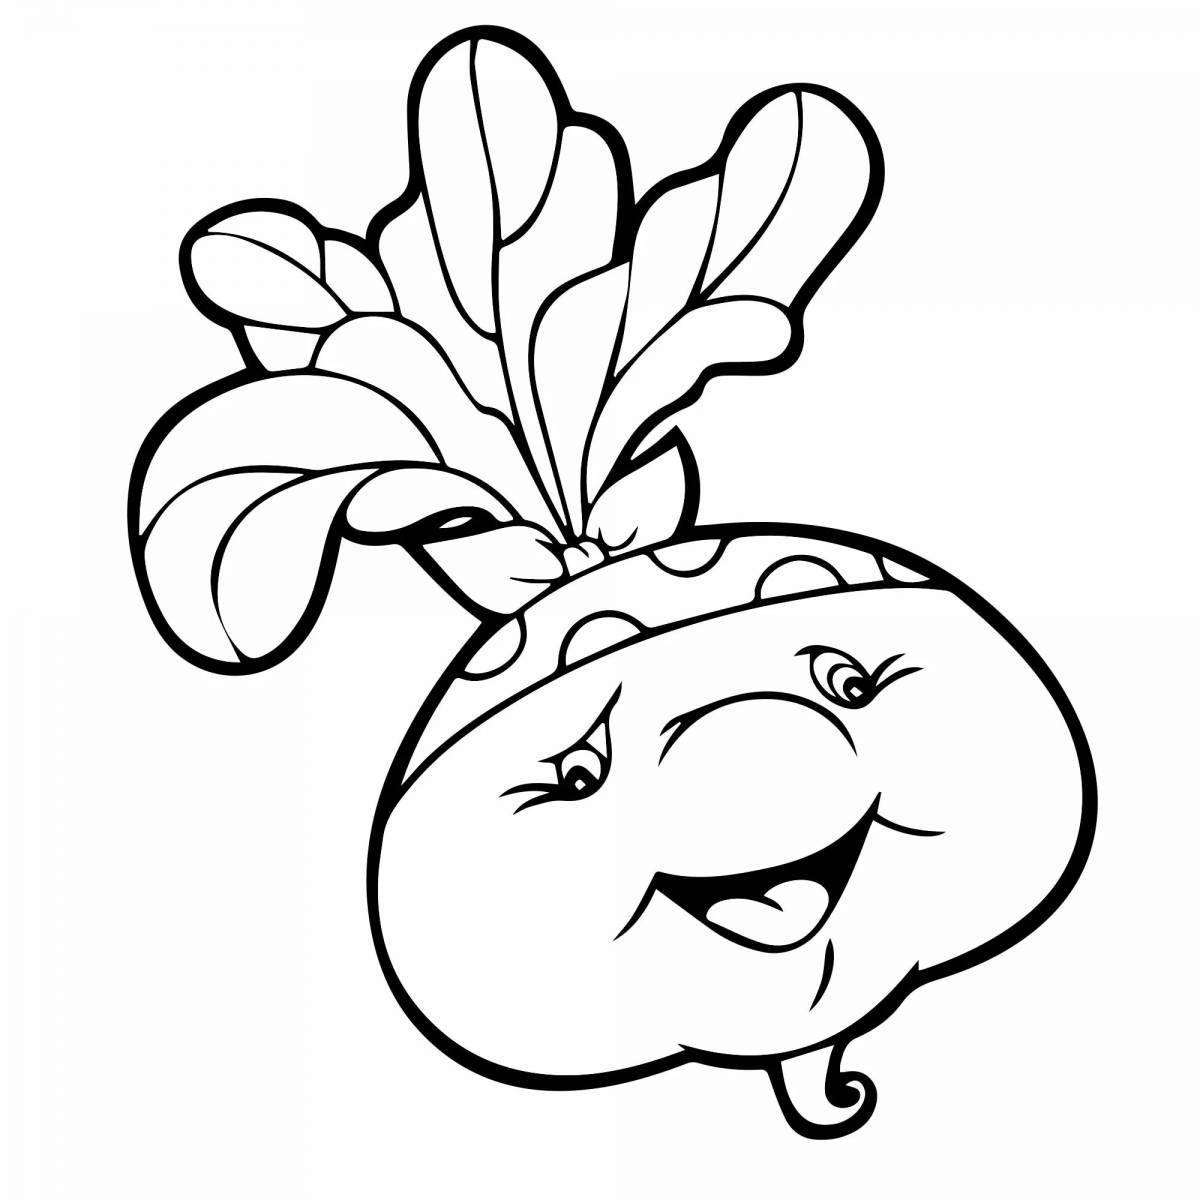 Adorable turnip coloring book for younger children